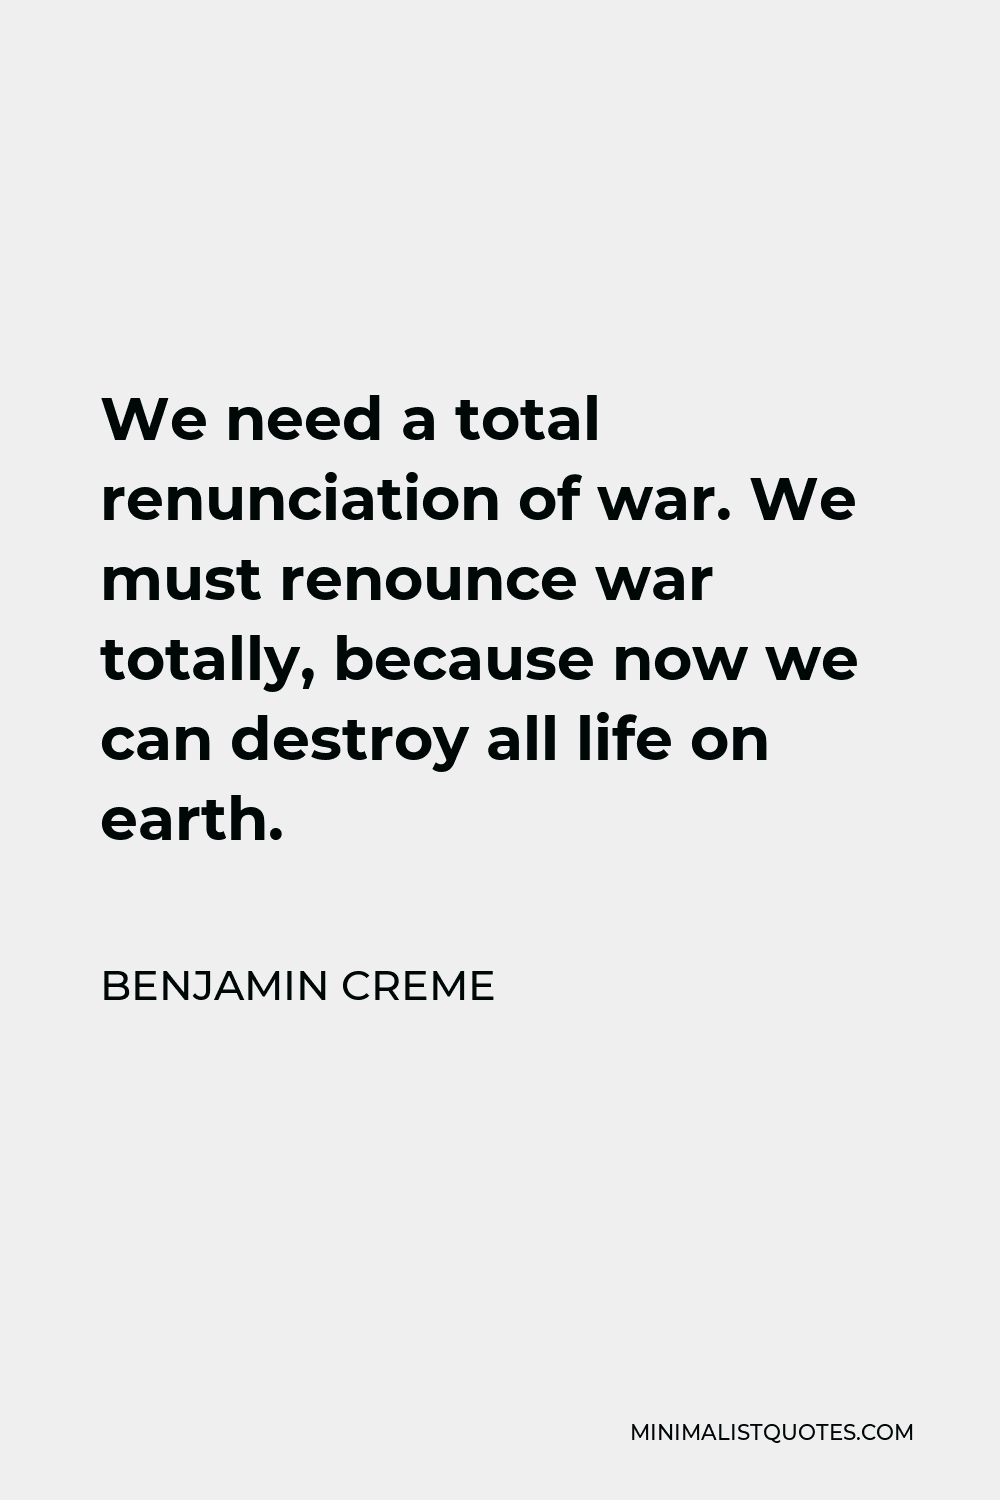 Benjamin Creme Quote - We need a total renunciation of war. We must renounce war totally, because now we can destroy all life on earth.